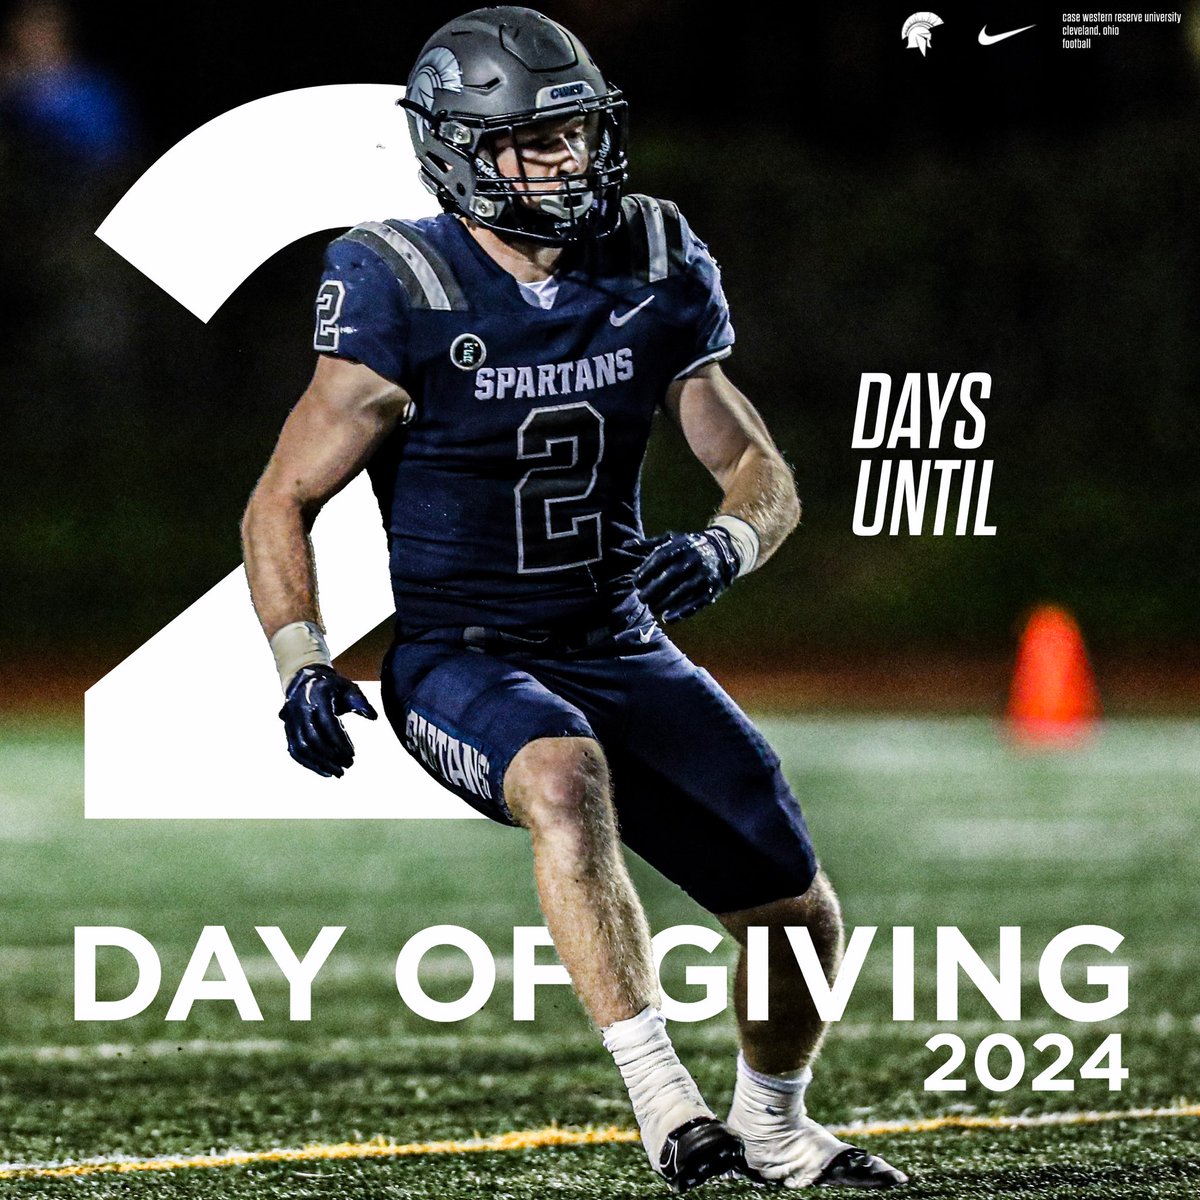 𝟐 𝐝𝐚𝐲𝐬 𝐮𝐧𝐭𝐢𝐥 𝐭𝐡𝐞 𝐃𝐚𝐲 𝐨𝐟 𝐆𝐢𝐯𝐢𝐧𝐠! Funds raised during the Day of Giving will be designated to the Intern Coaching Program. #d3fb #BlueCWRU #RollSpartans